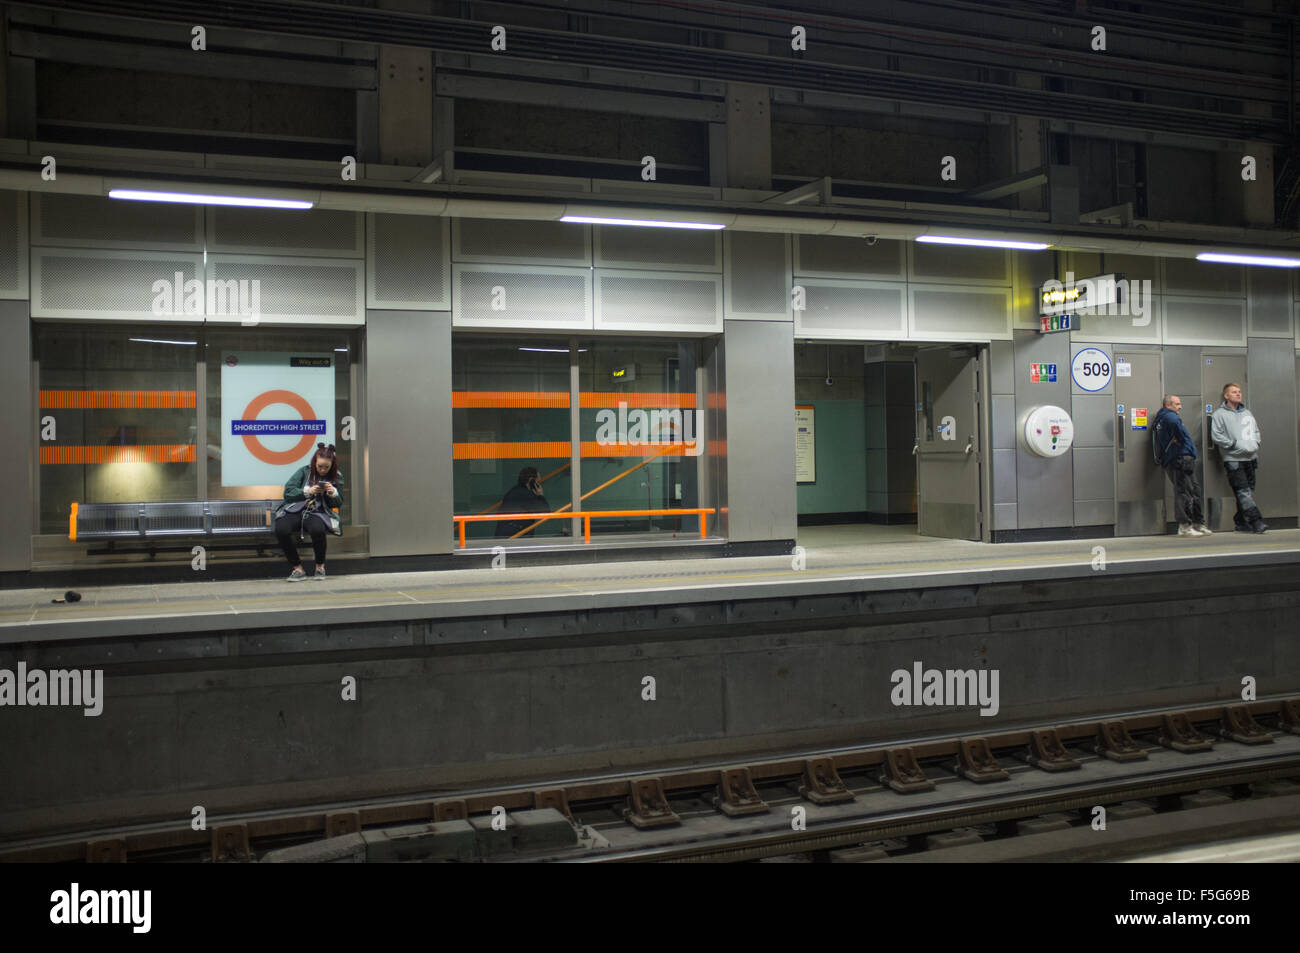 Waiting for a train at Shoreditch Tube station, London Stock Photo